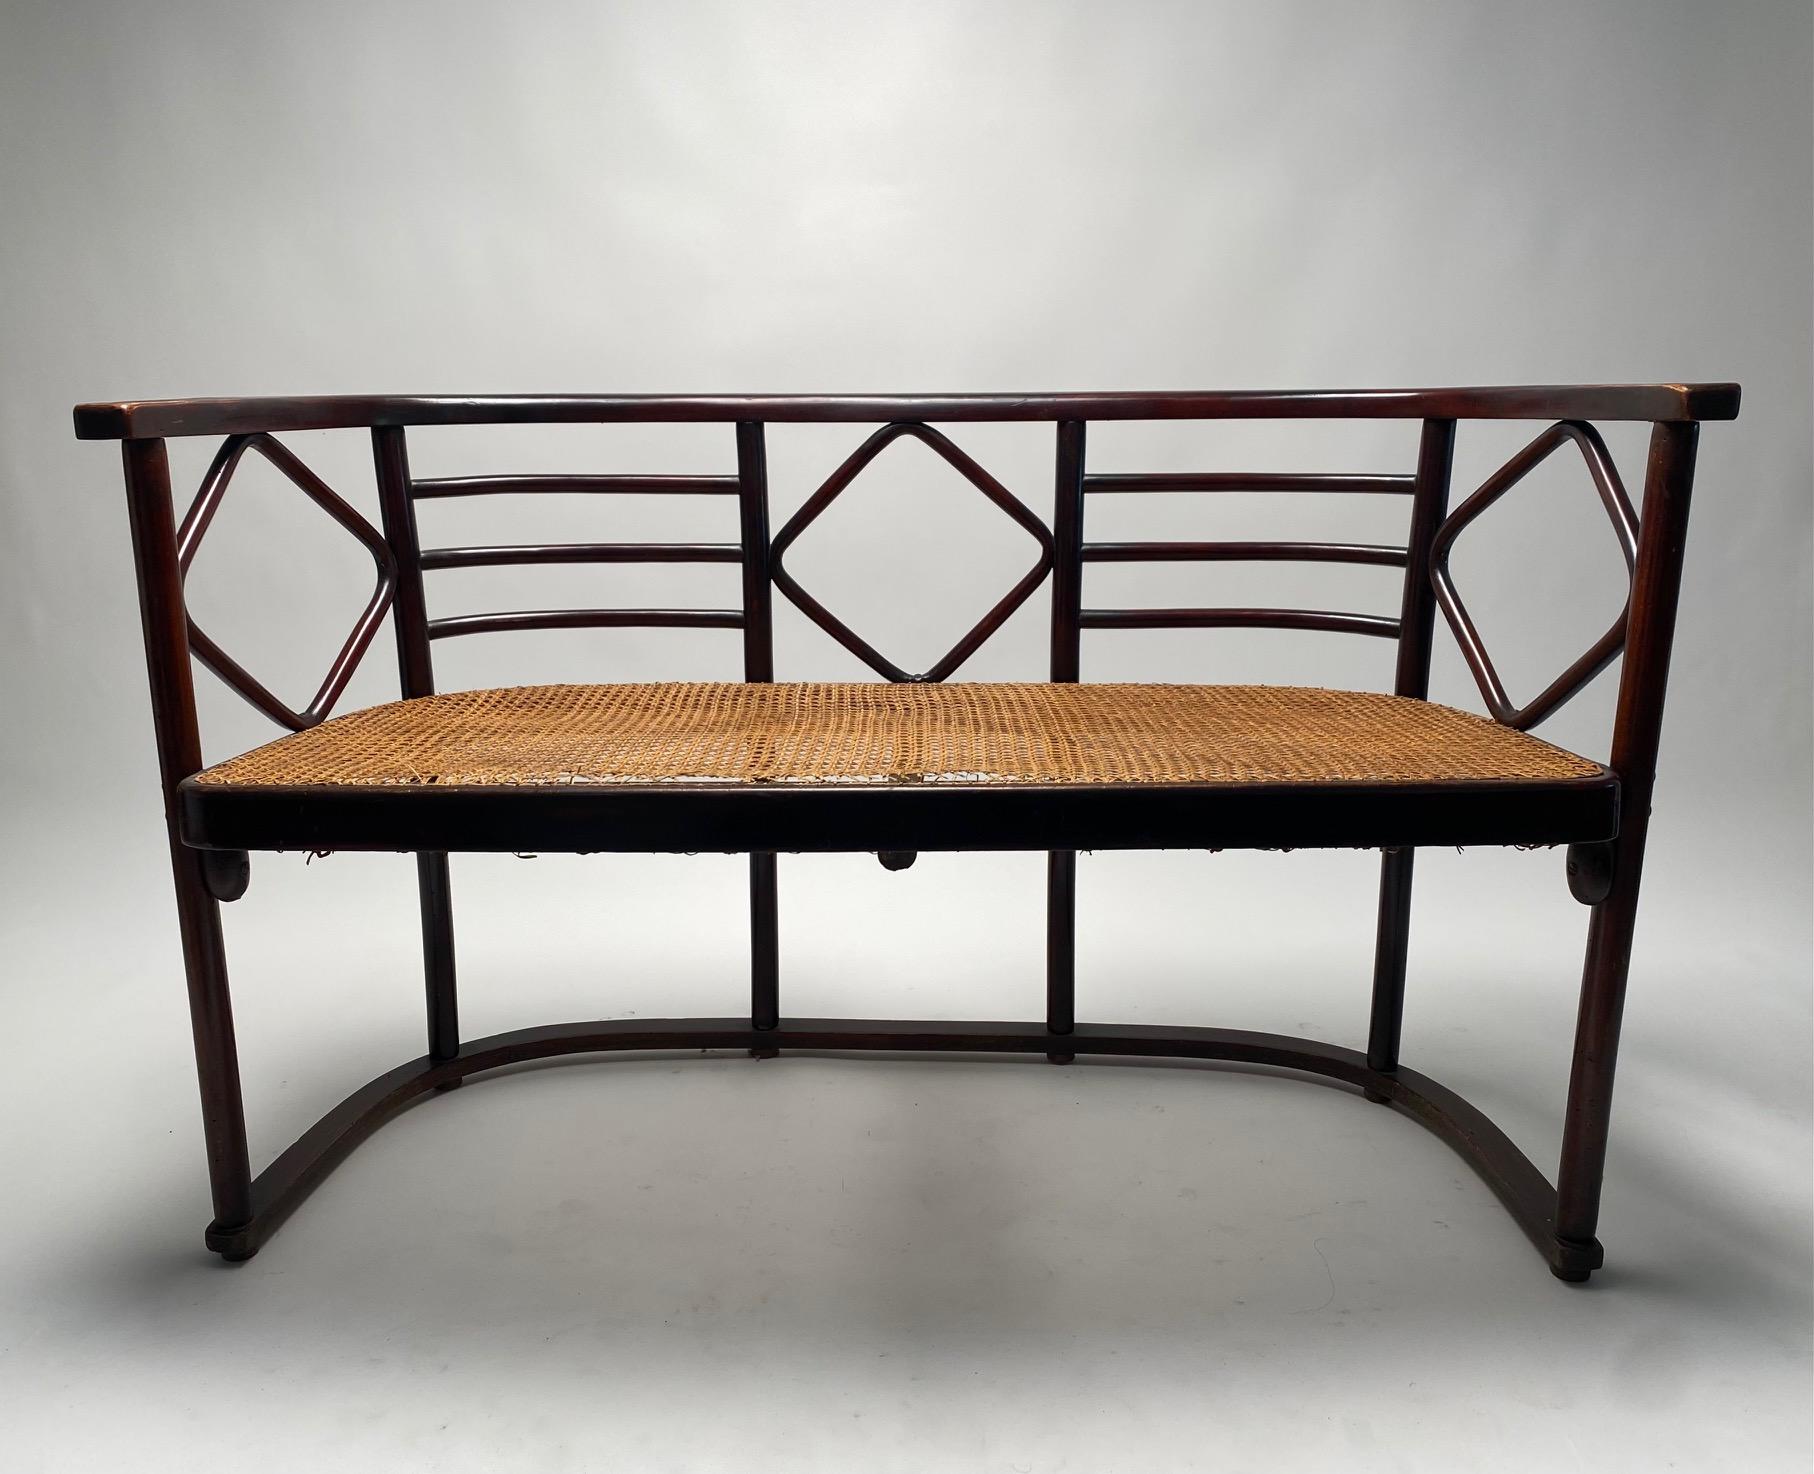 Bentwood Sofa mod. Fledermaus by Josef Hoffmann for Thonet, 1910s

It is one of the most famous creations of the Austrian architect Josef Hoffmann, one of the founding fathers of the Viennese Secession. built in the early 1900s, they were used to